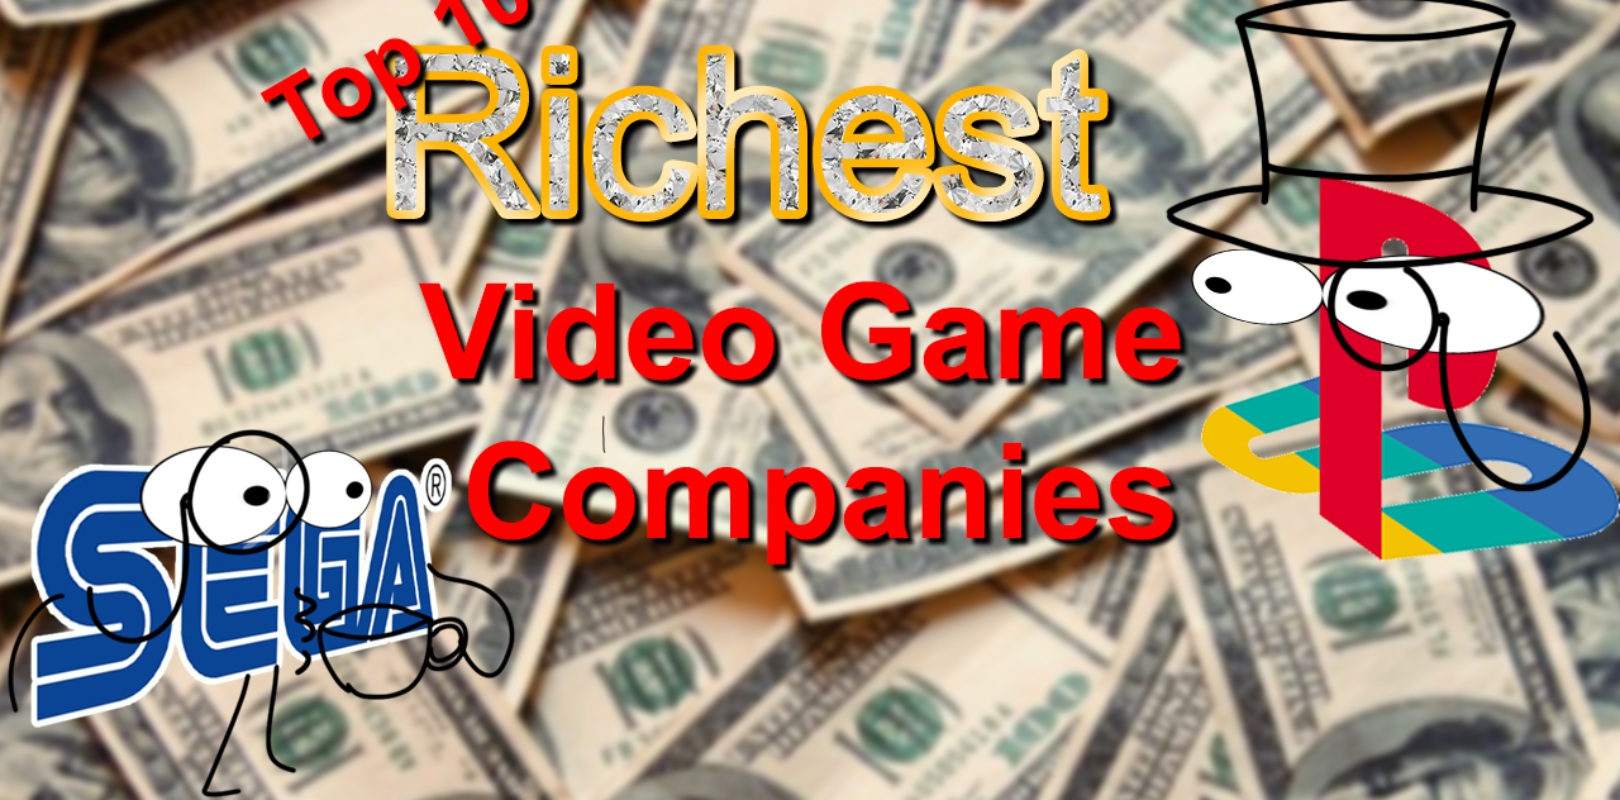 Top 10 Richest Pro Gamers in the World